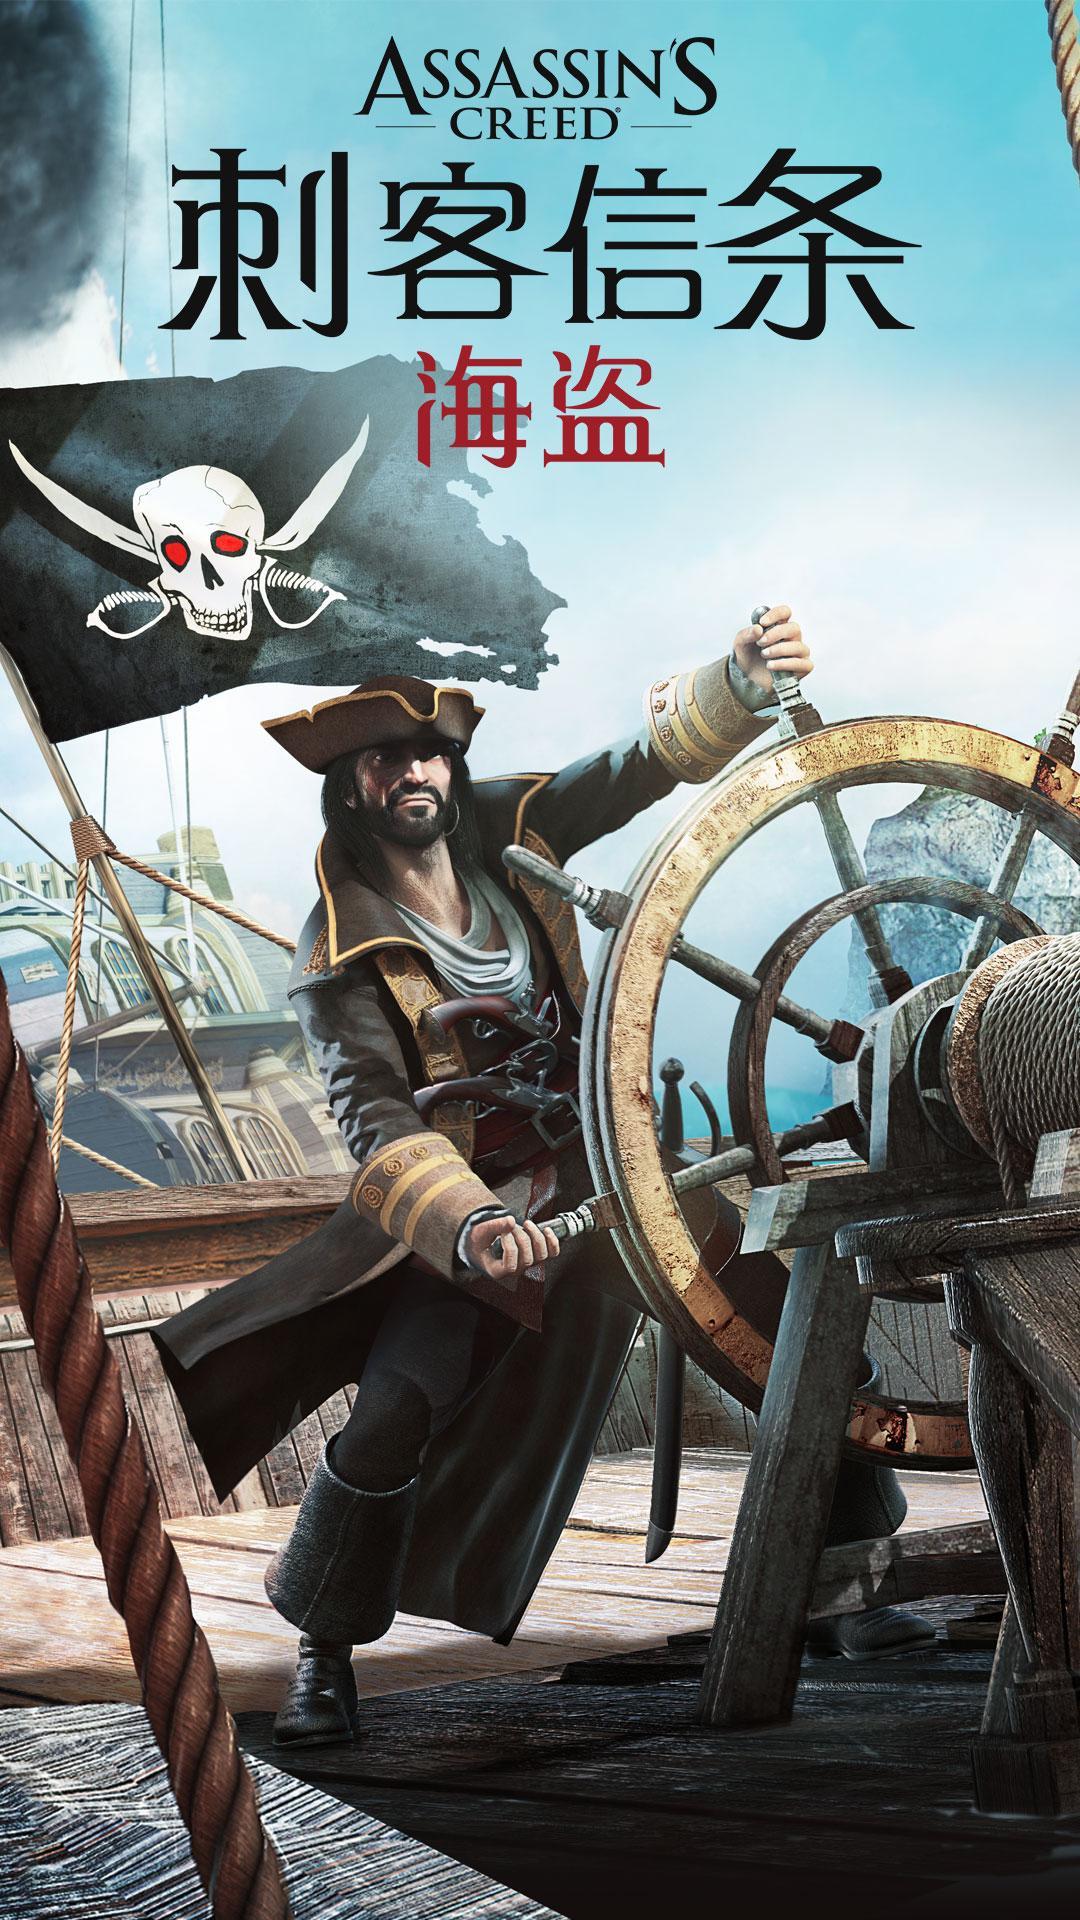 Assassin S Creed Pirates Mobile Version Android IOS Apk Kostenlos.